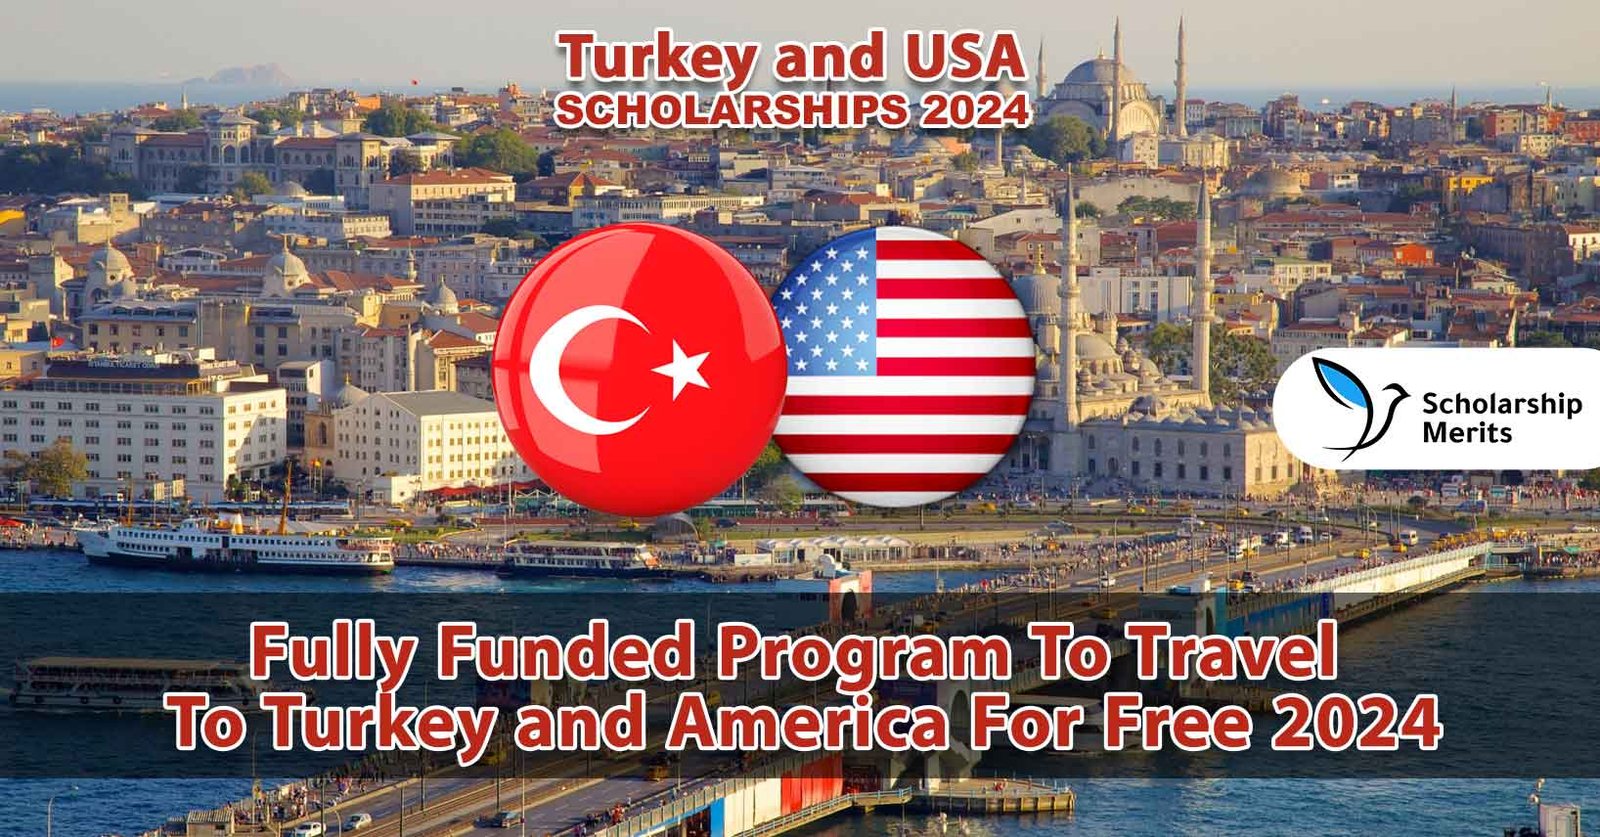 Program-To-Travel-To-Turkey-and-America-For-Free-2024